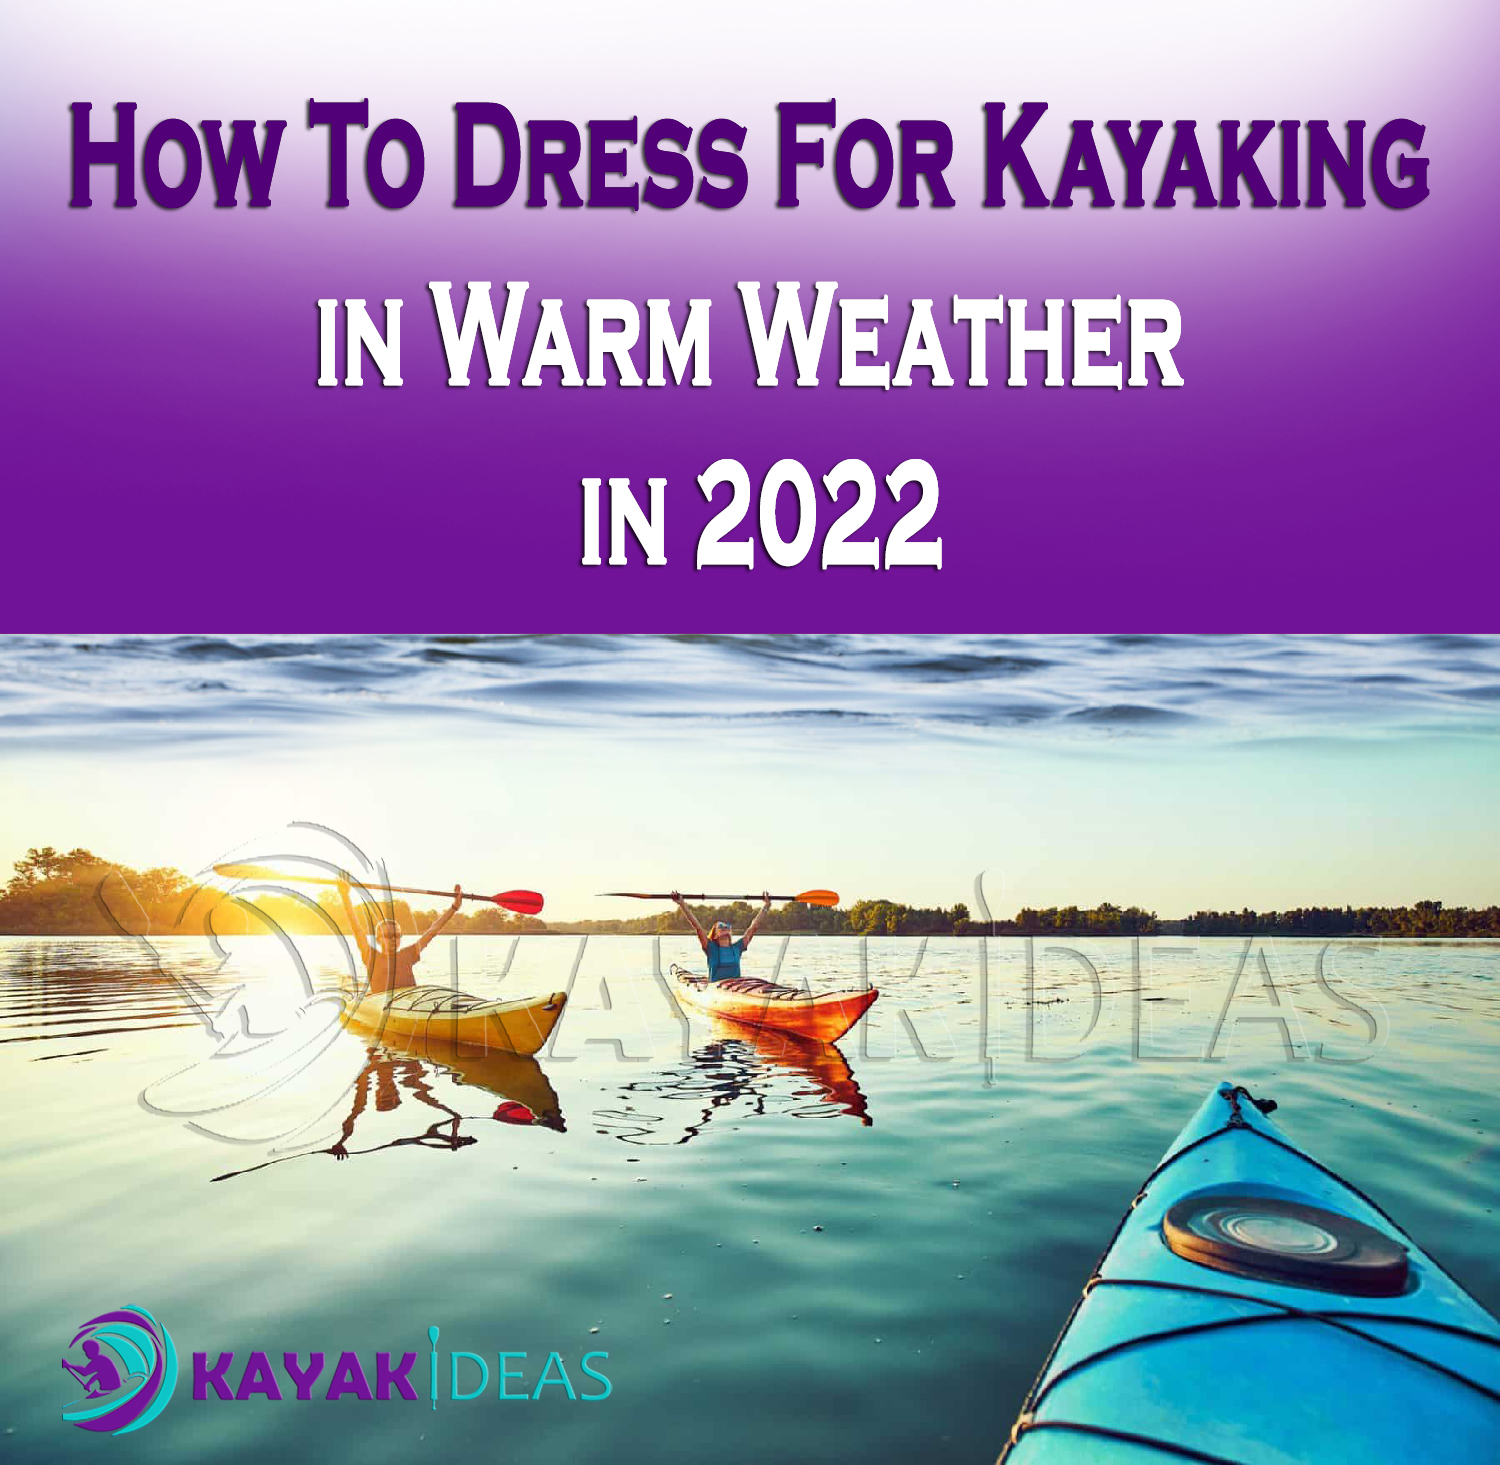 How-To-Dress-For-Kayaking-in-Warm-Weather-in-2022.jpg